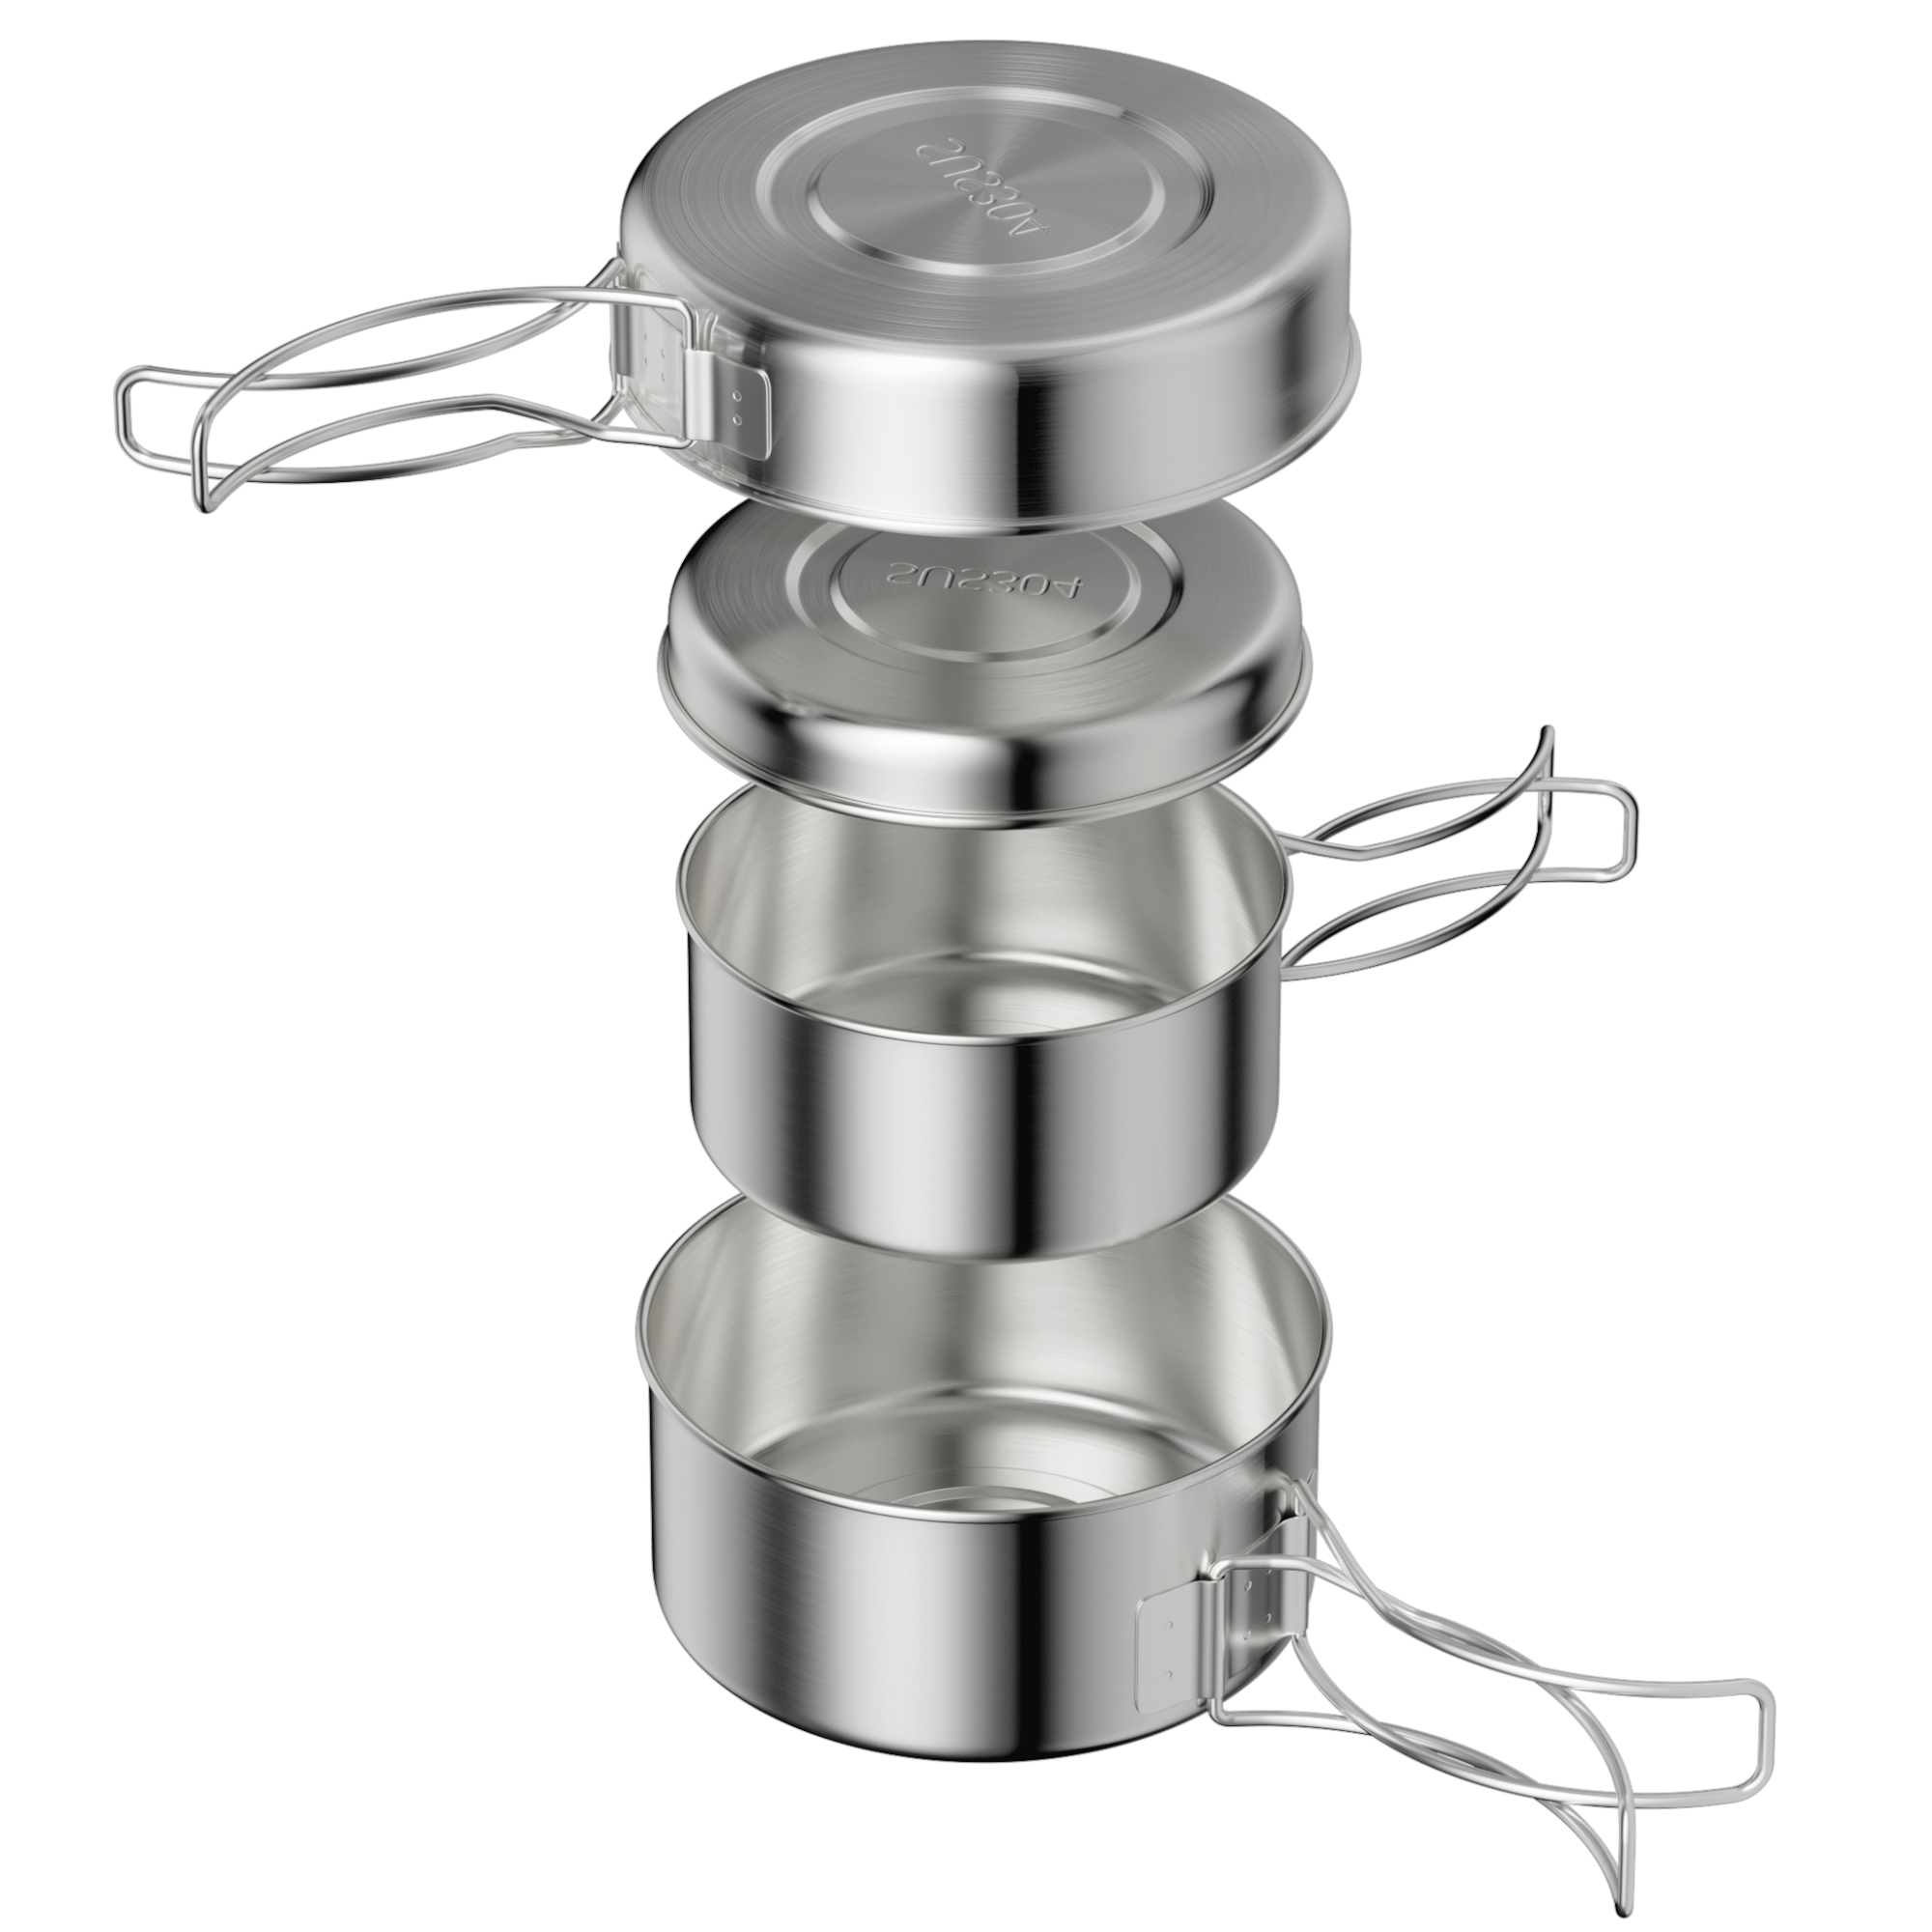 https://cdn.shopify.com/s/files/1/0416/3908/4190/products/stainlesssteelpotset002.png?v=1678098356&width=4000